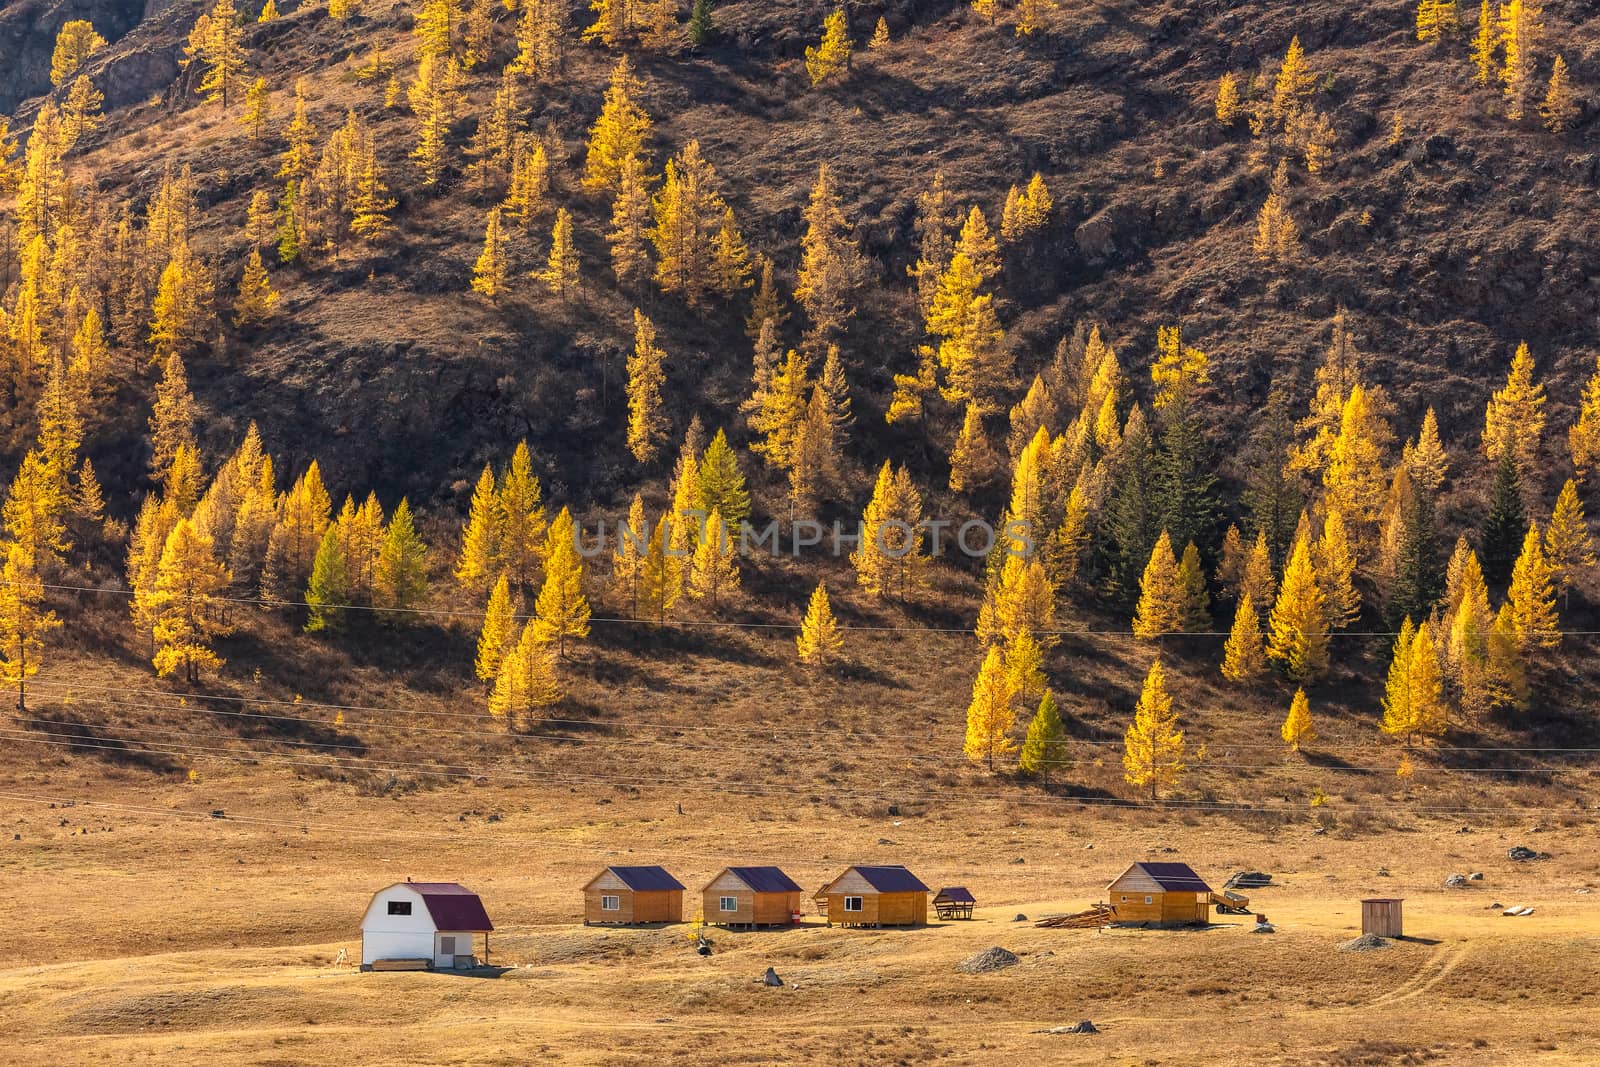 Altai mountains. Beautiful highland autumn panoramic landscape. Wooden huts in the foreground. Mountain slopes covered with golden trees in the background. Russia. Siberia.